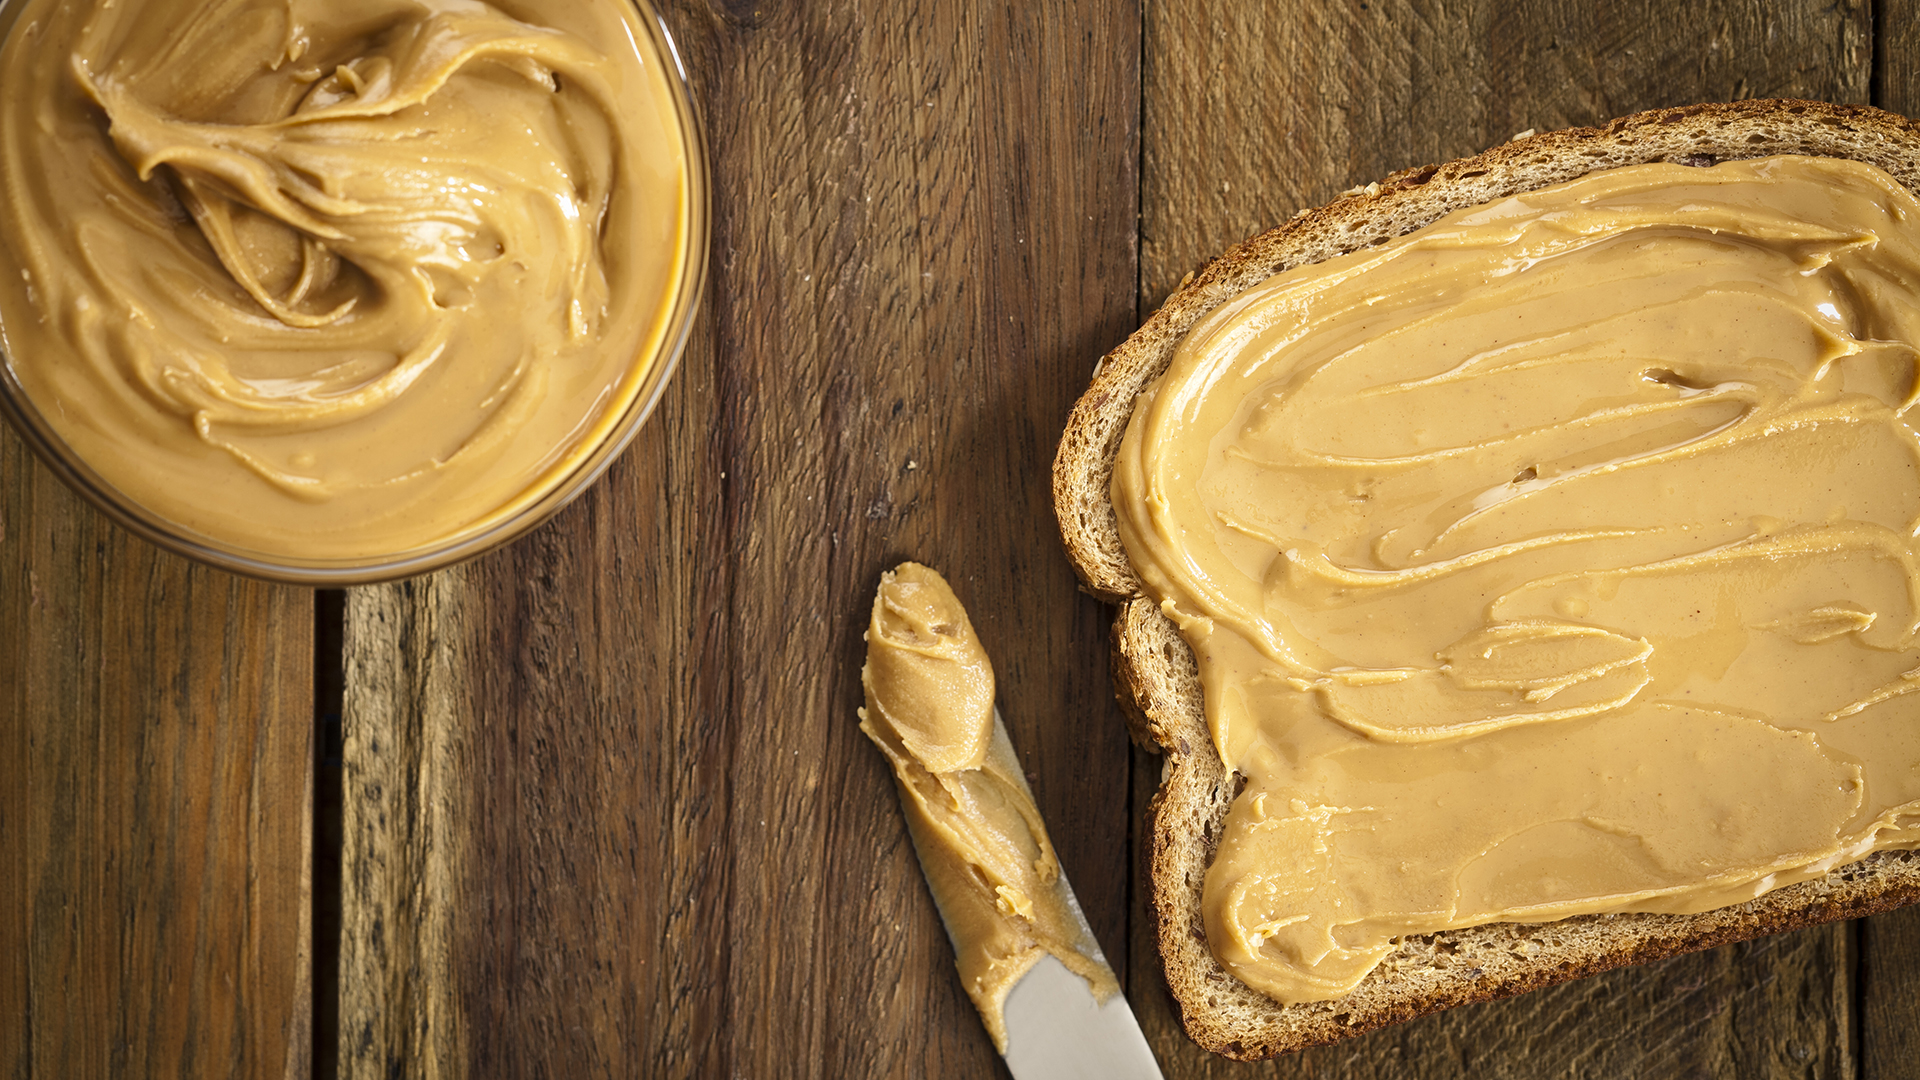 Frozen peanut butter 'hack' causes controversy